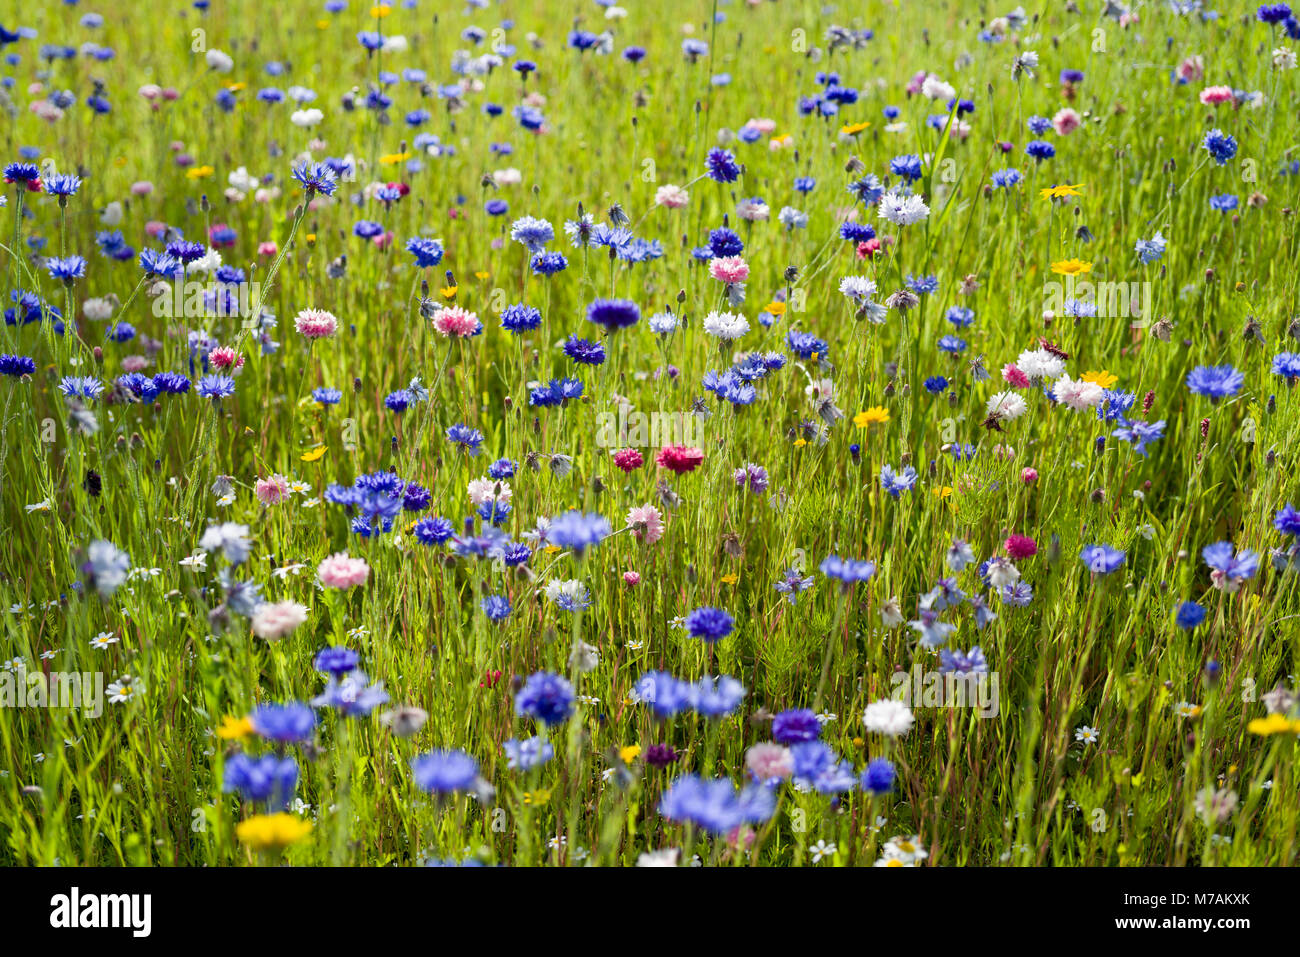 Part of a grassed barrier space between the main A702 road and a housing estate in Biggar, Scotland, left unmowed and seeded with wildflowers. Stock Photo